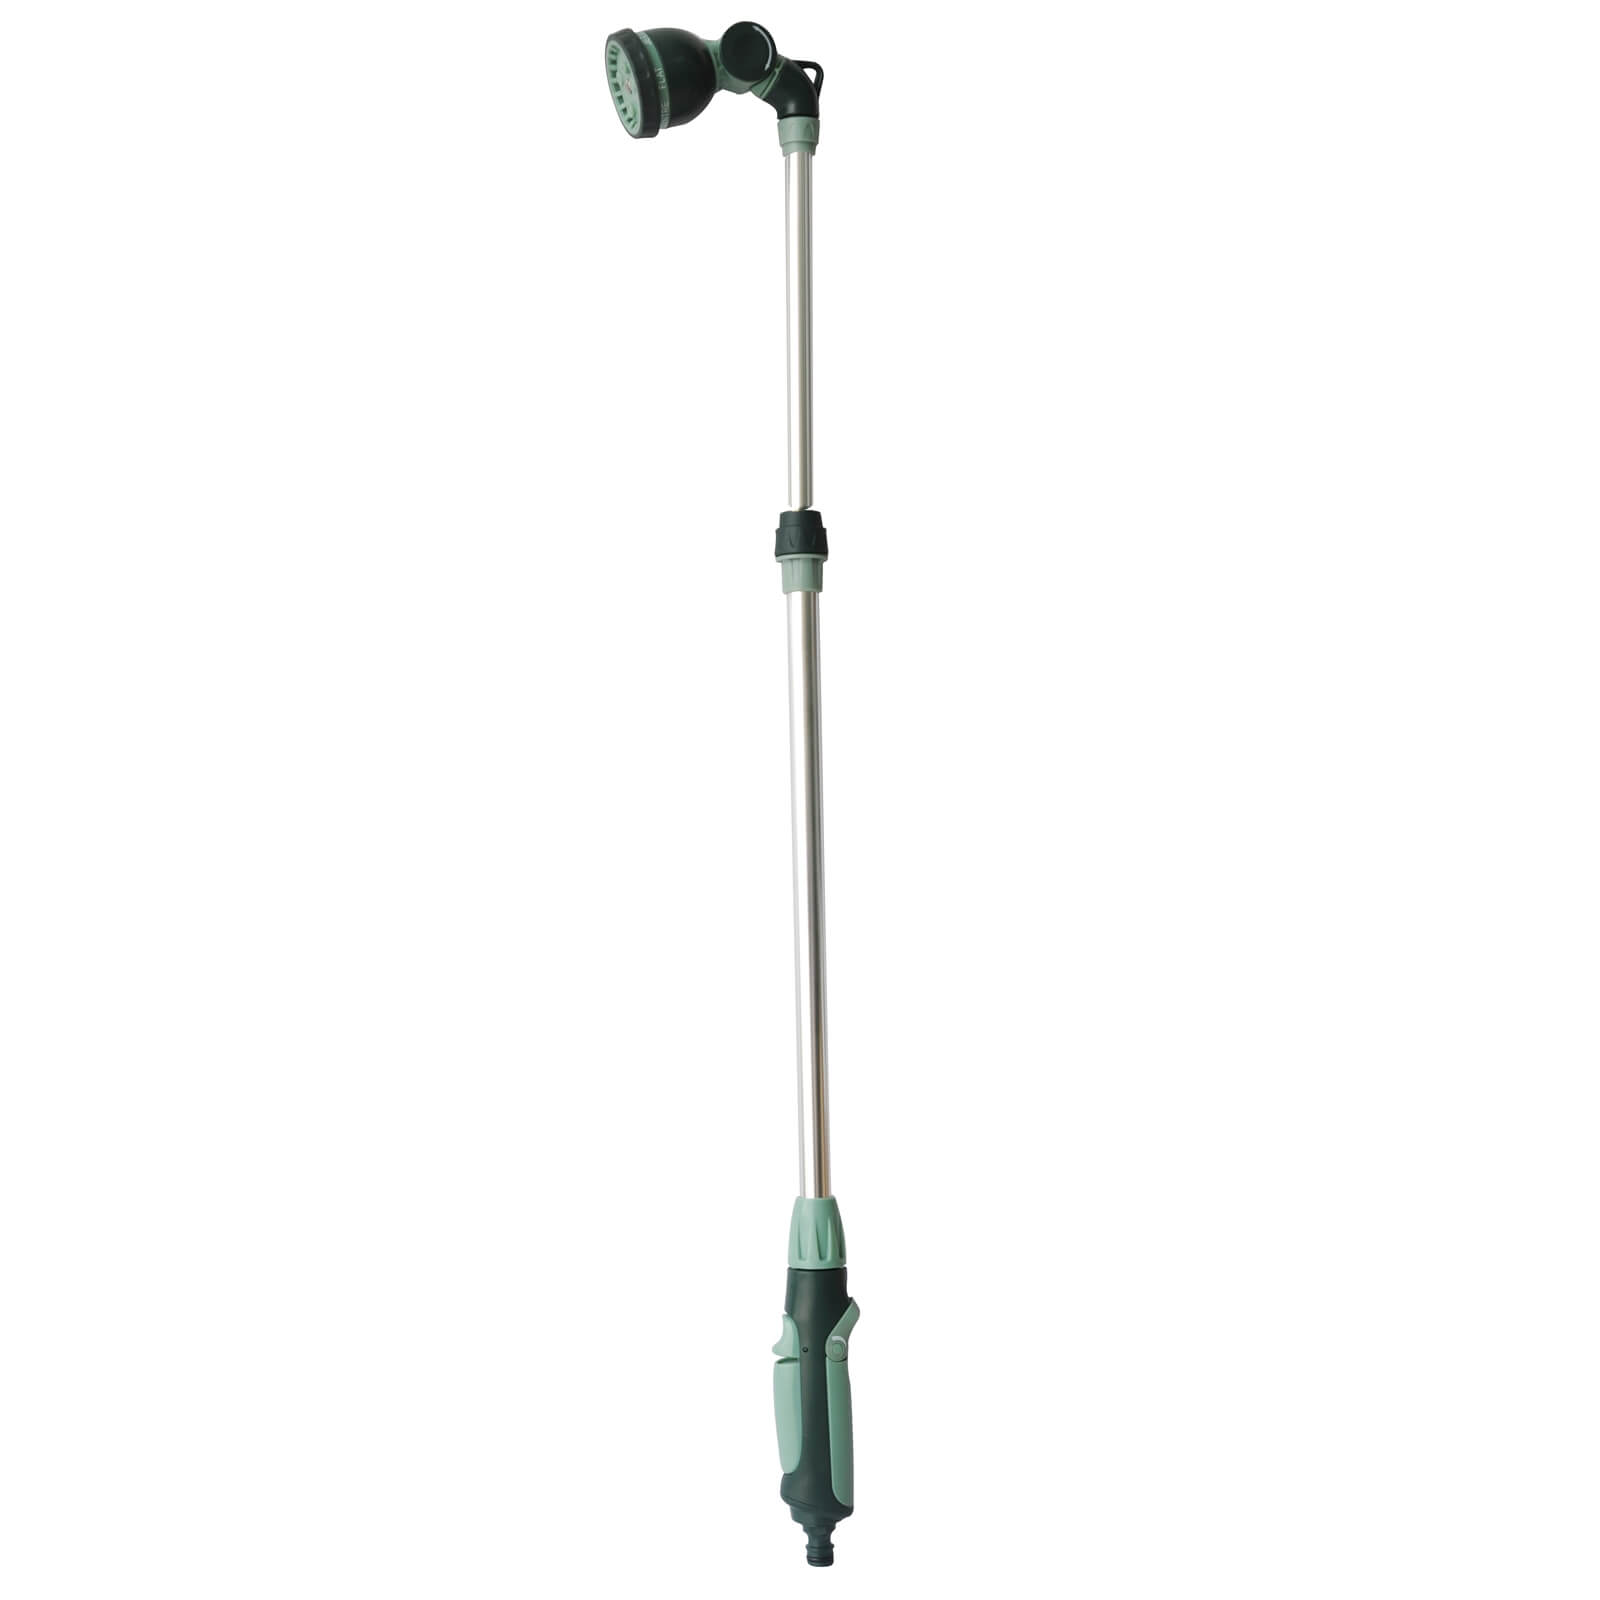 Homebase Multi-Position Watering Wand